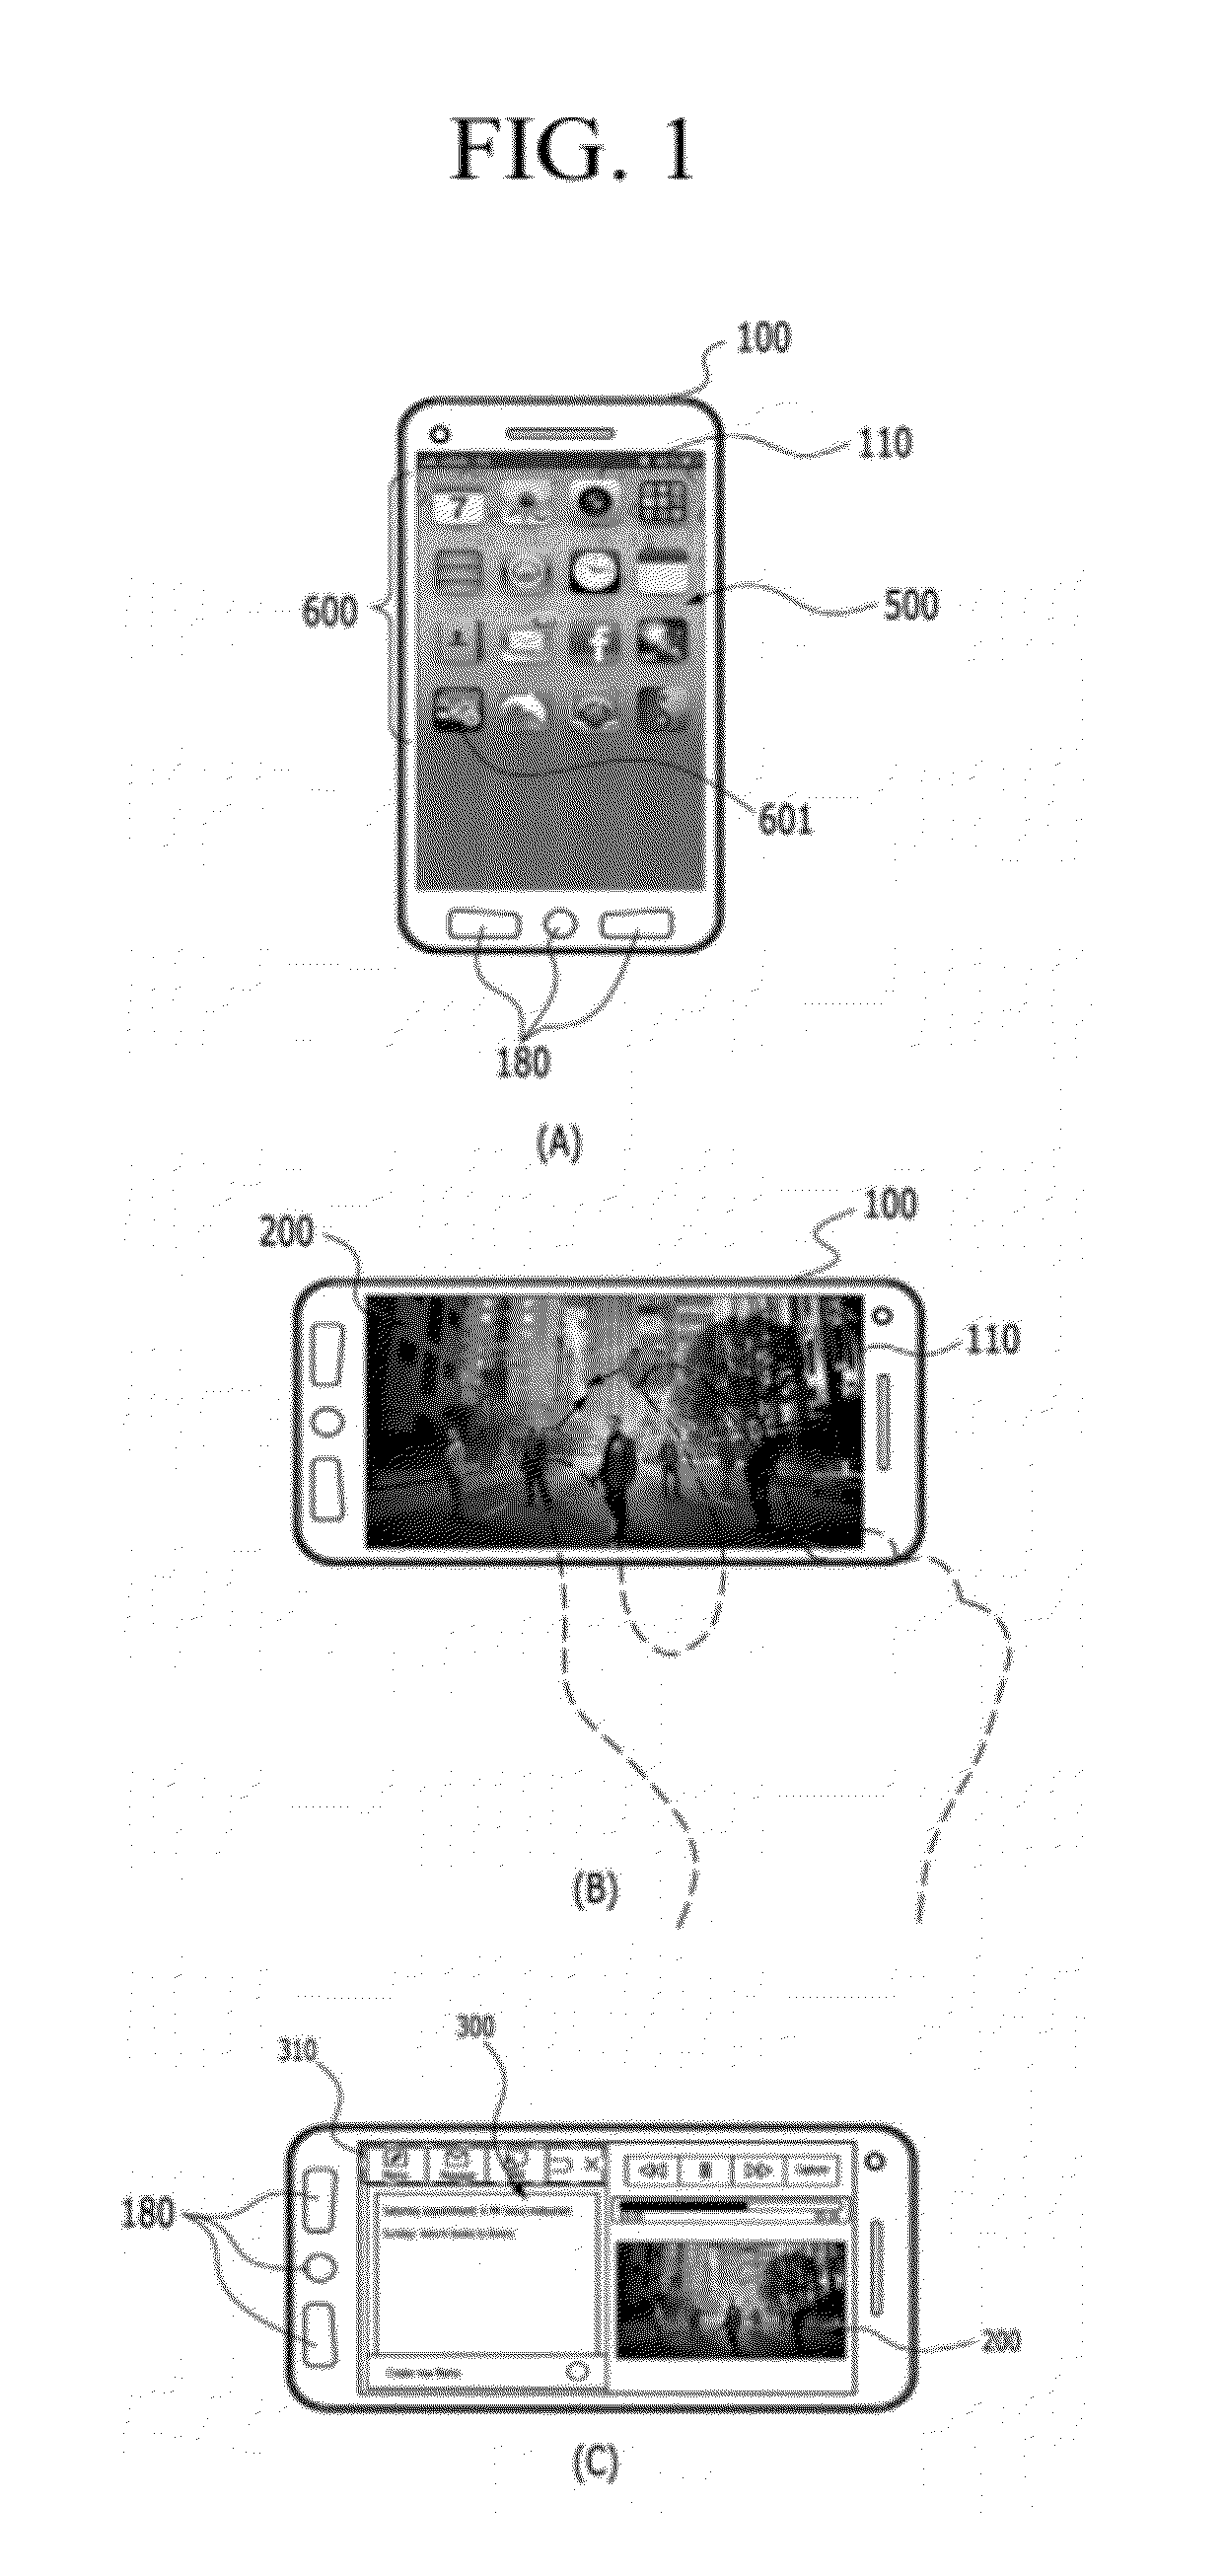 Transferring objects between application windows displayed on mobile terminal